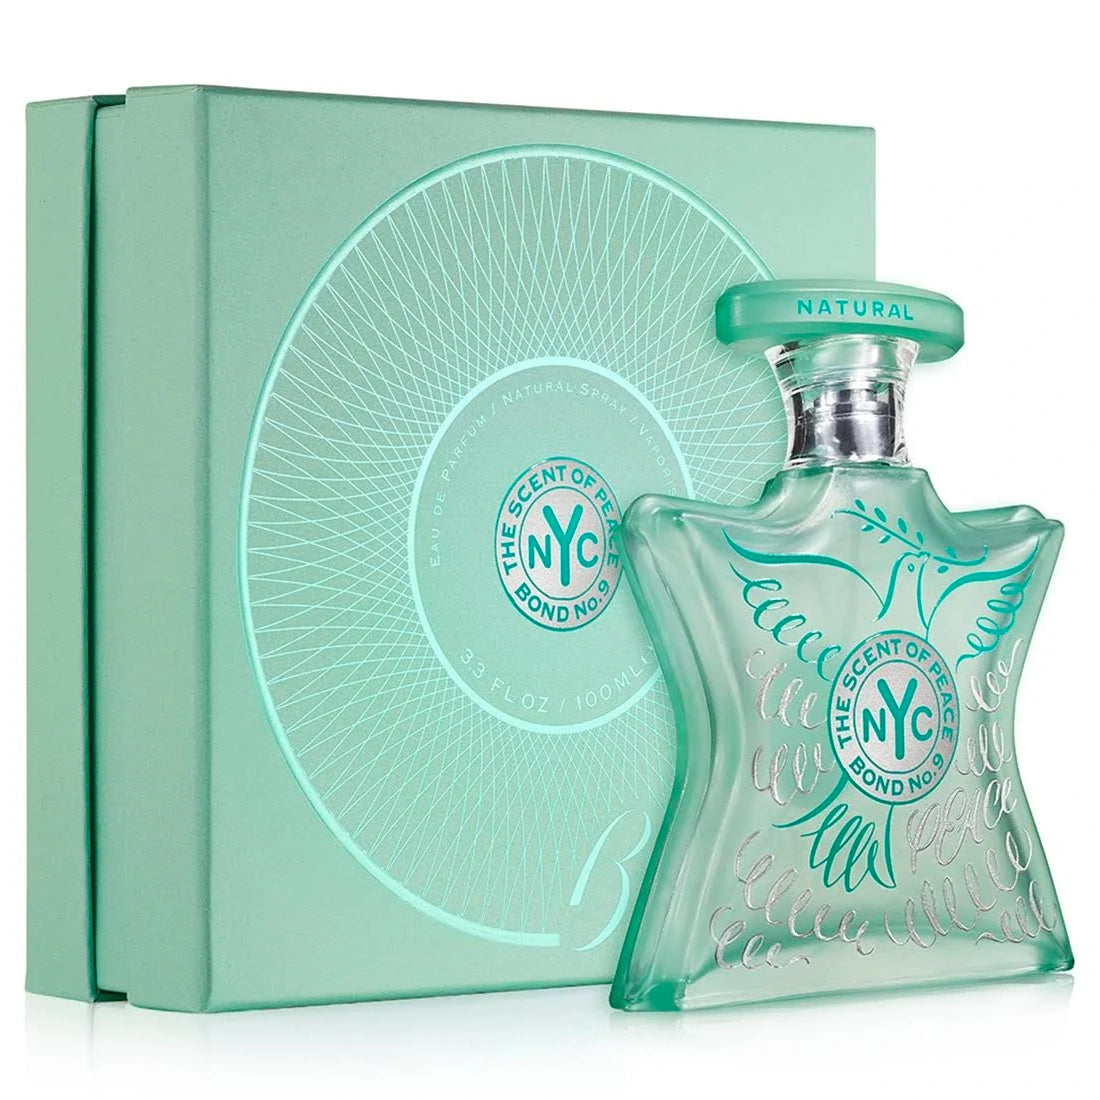 <p>Indulge in luxury with our Bond No. 9 Scent of Peace Natural 3.4 oz EDP unisex fragrance. This all-natural and vegan scent is composed of raw, eco-chic essential oils that linger beautifully on the skin. Featuring notes of lemon, blackcurrant, raspberry, rose damascena, cedar wood, and musk, this fragrance is a breath of fresh air. Upgrade to clean beauty with our sophisticated and effervescent scent.</p>